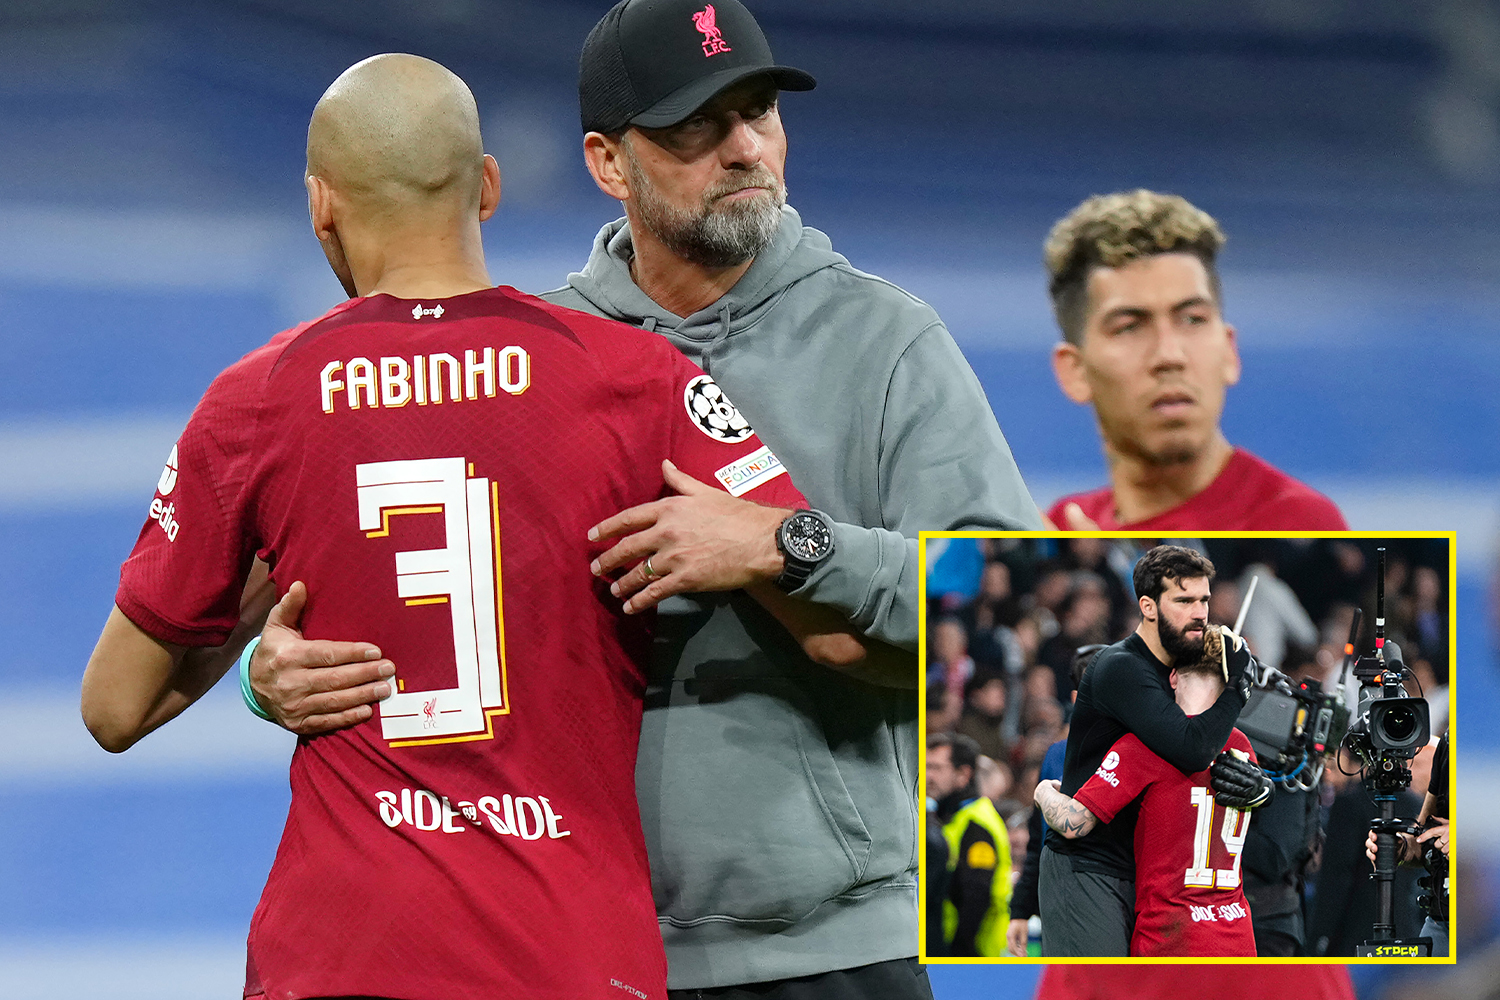 Jurgen Klopp says 'right team' went through as Liverpool labelled 'nearly team' with Champions League exit to Real Madrid sparking end of an era talk